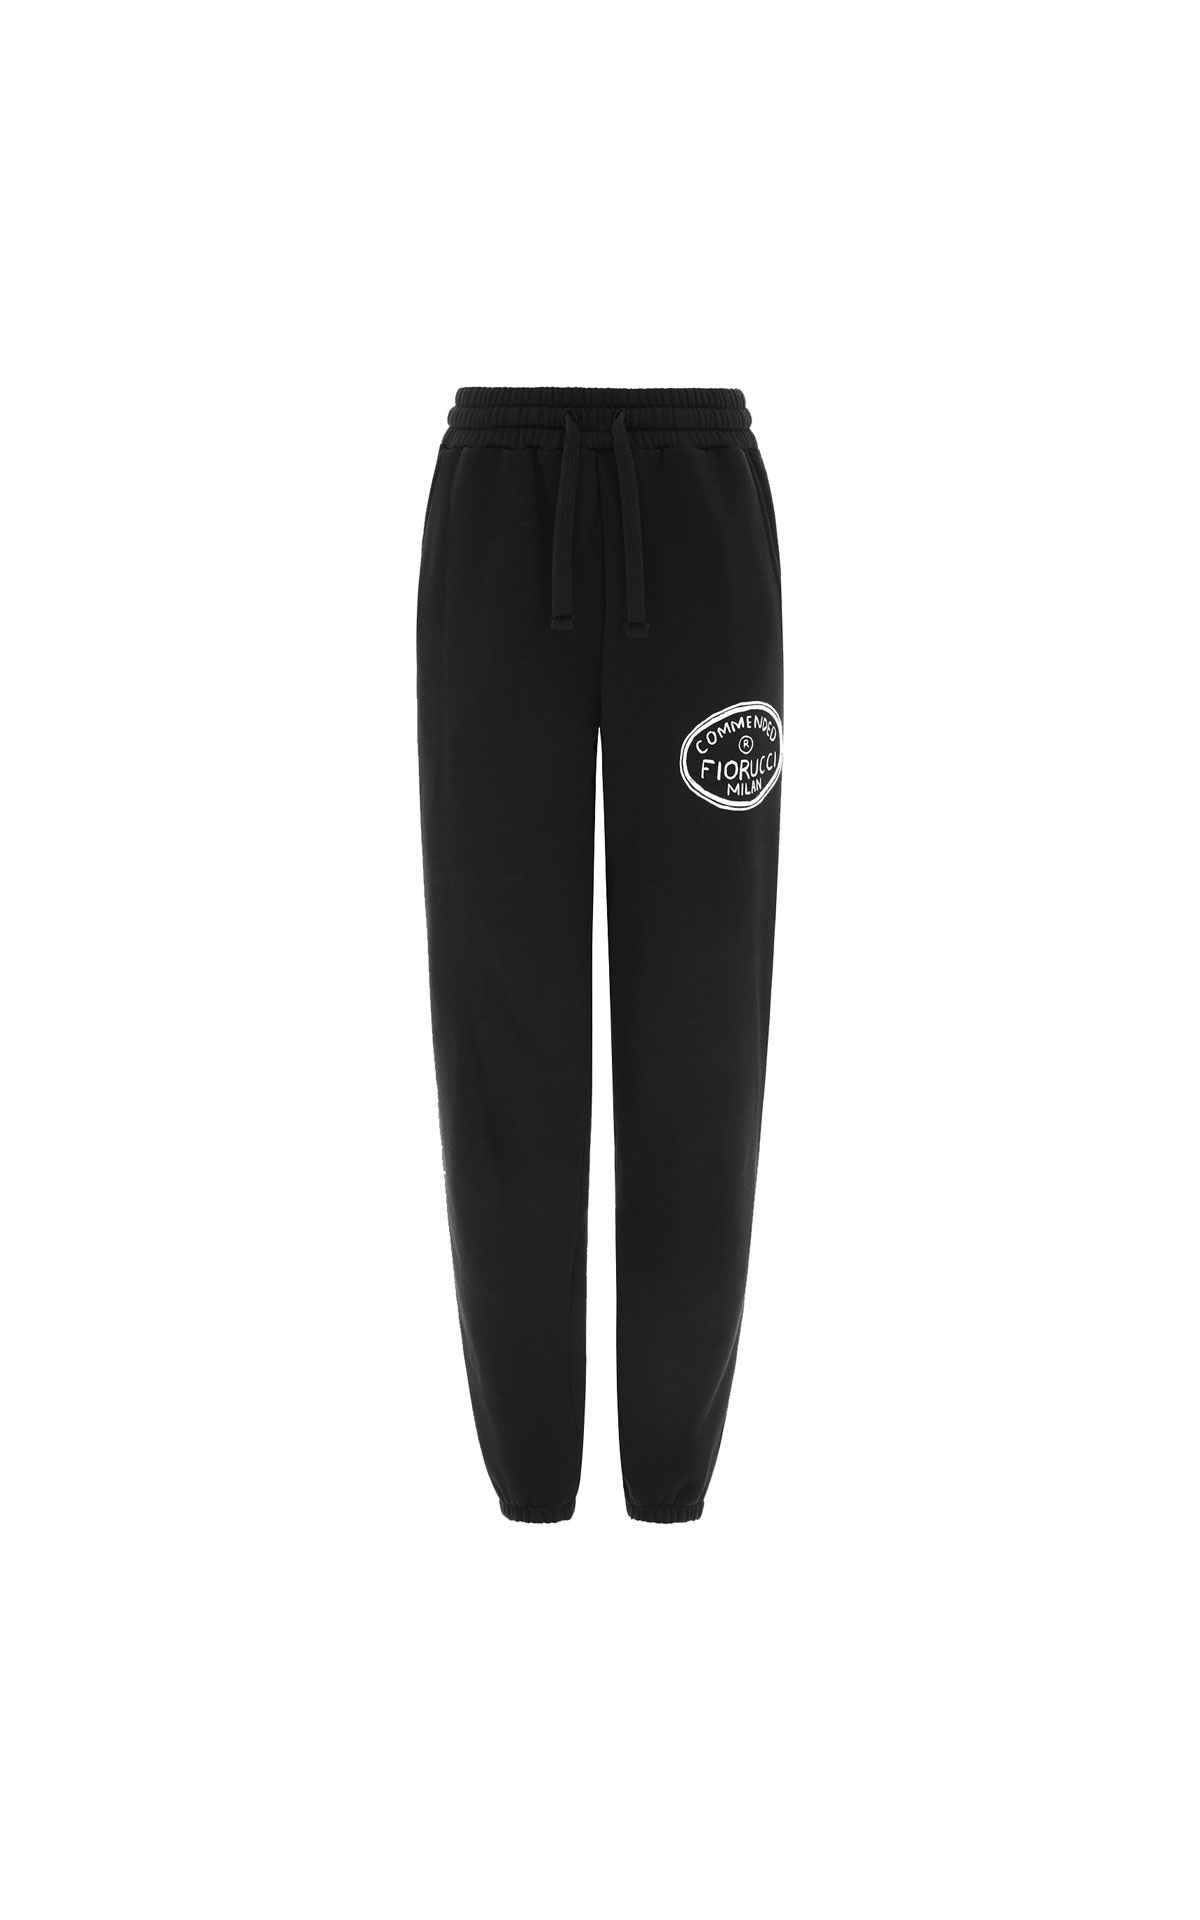 Fiorucci Unisex illustrated commended joggers black from Bicester Village